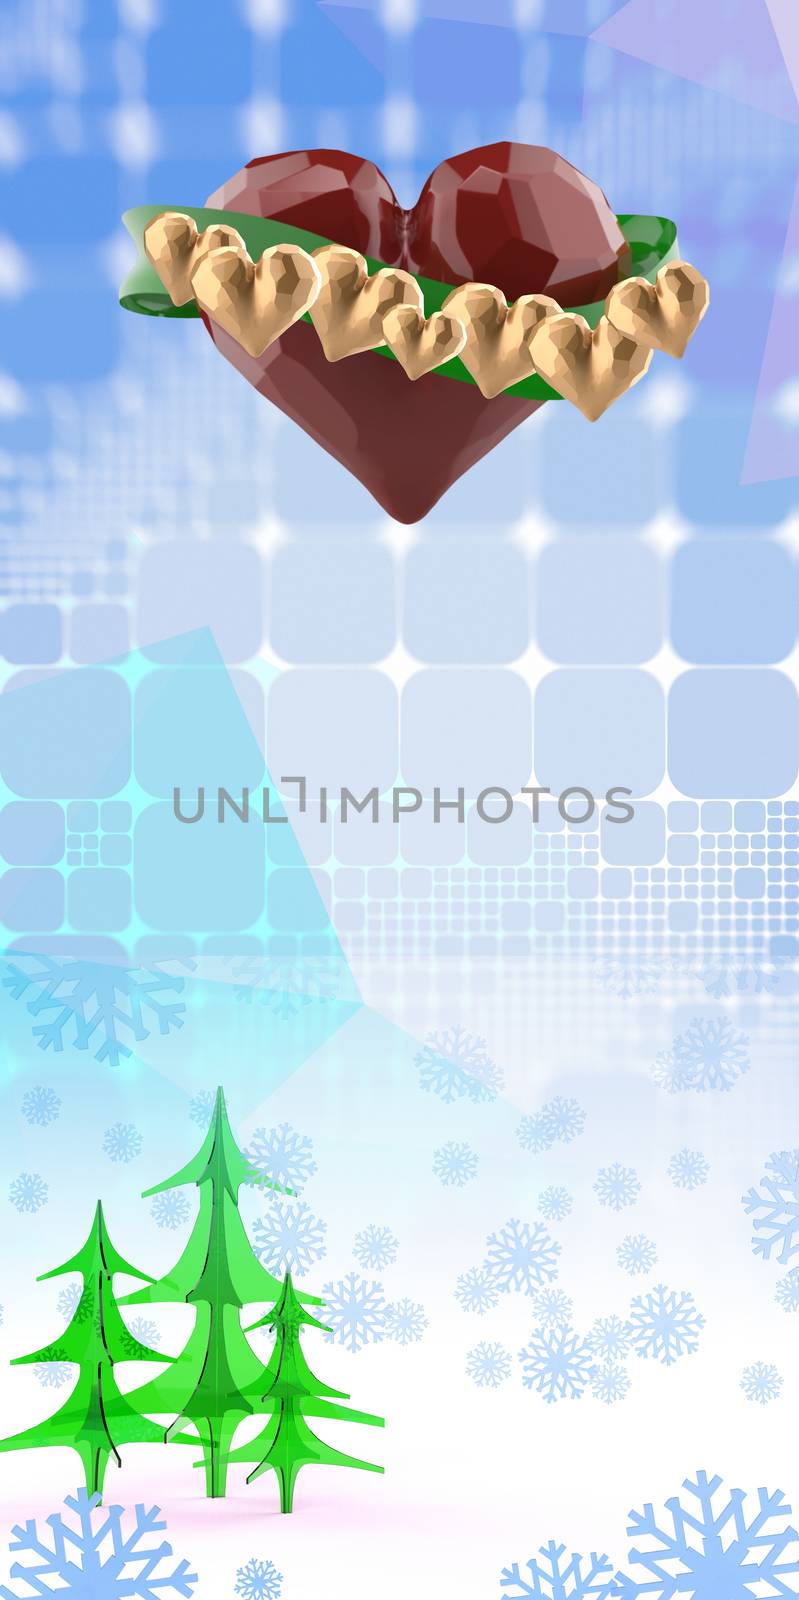 Happy Valentine day Flying red chopped heart with green ribbon and gold hearts. On blue abstract square polygonal background with christmas trees and snowflakes. 3d illustration by skrotov